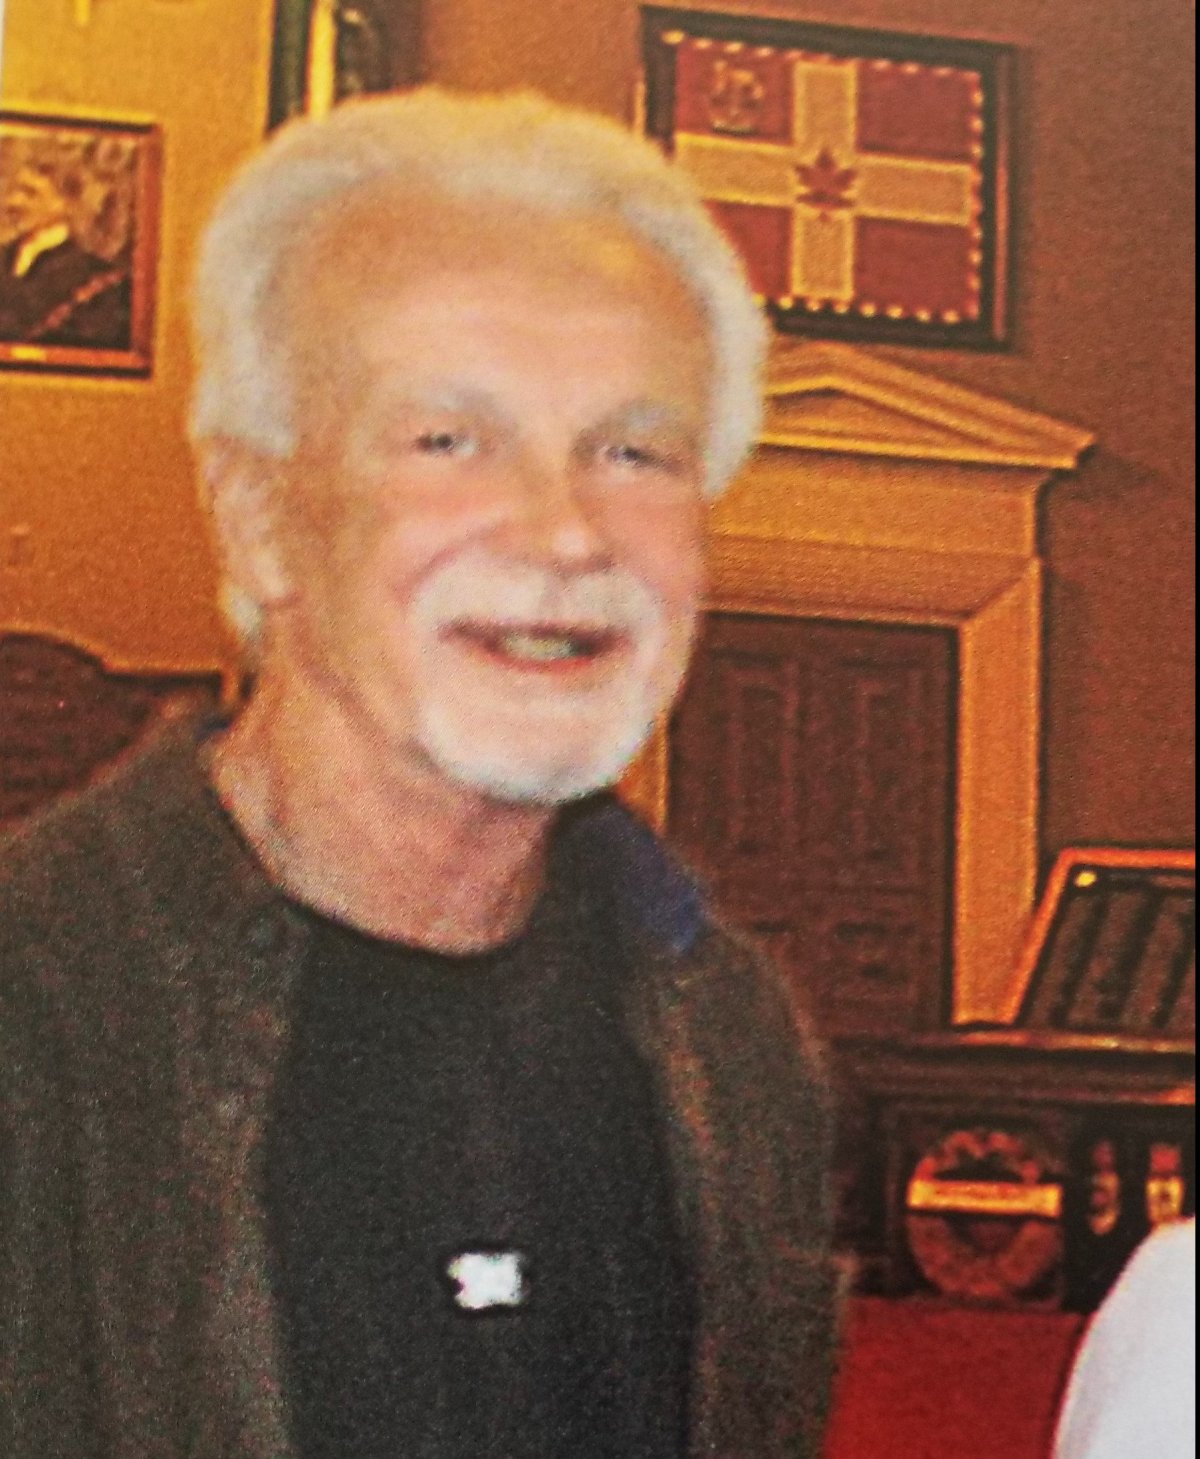 Northumberland OPP are looking for Richard Hrdlicka, 64, of Campbellford.